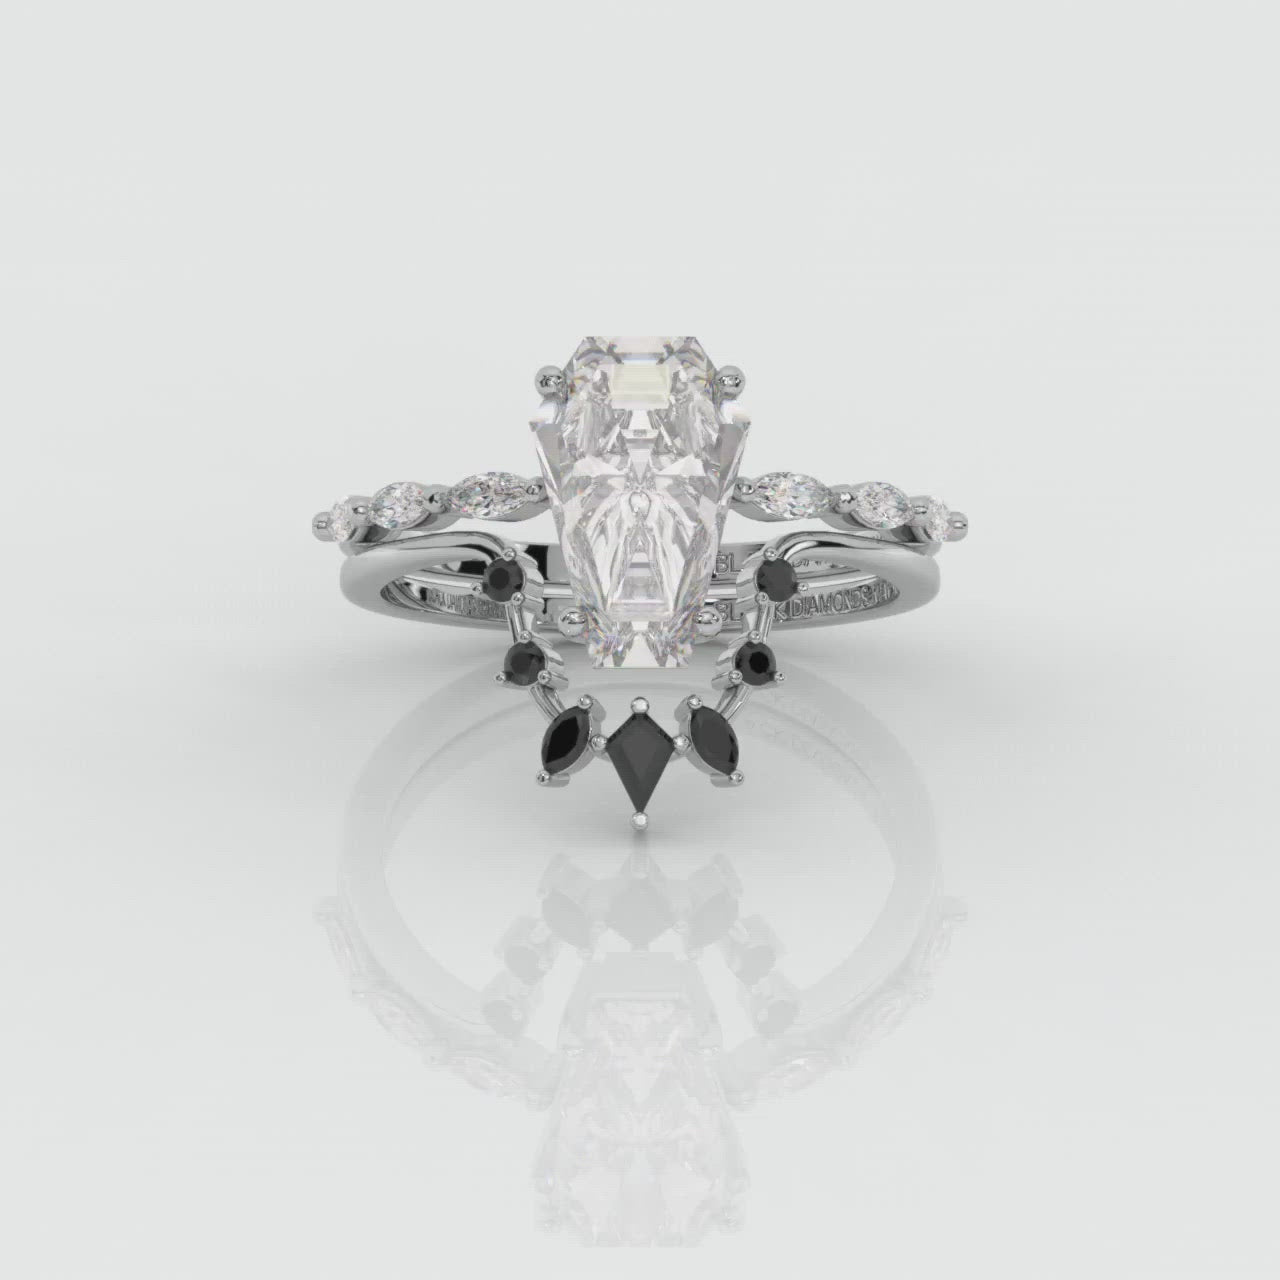 Devoted To You- Limited Coffin Cut Moissanite Diamond Gothic Ring Set